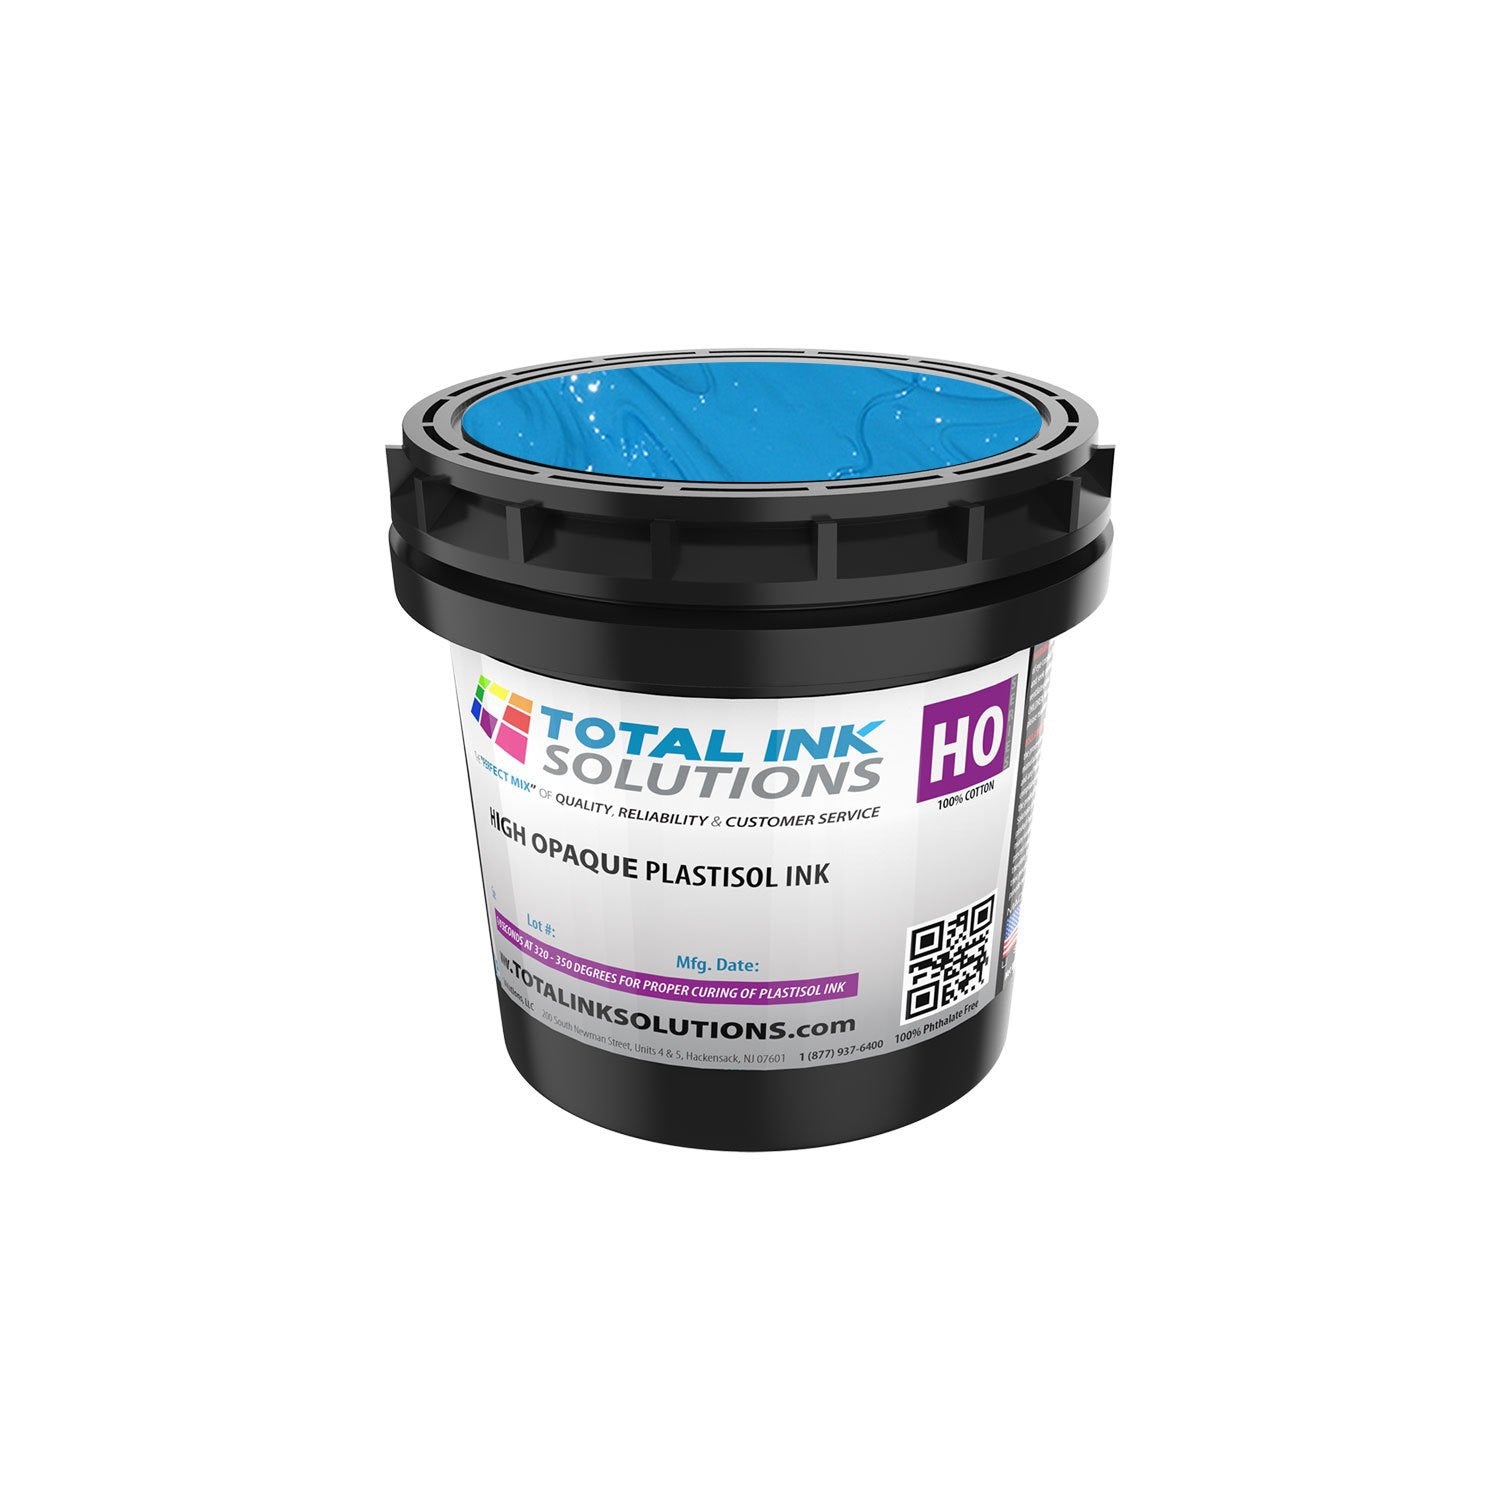 HIGH OPAQUE PLASTISOL INK – COLORS-QUART - Total Ink Solutions